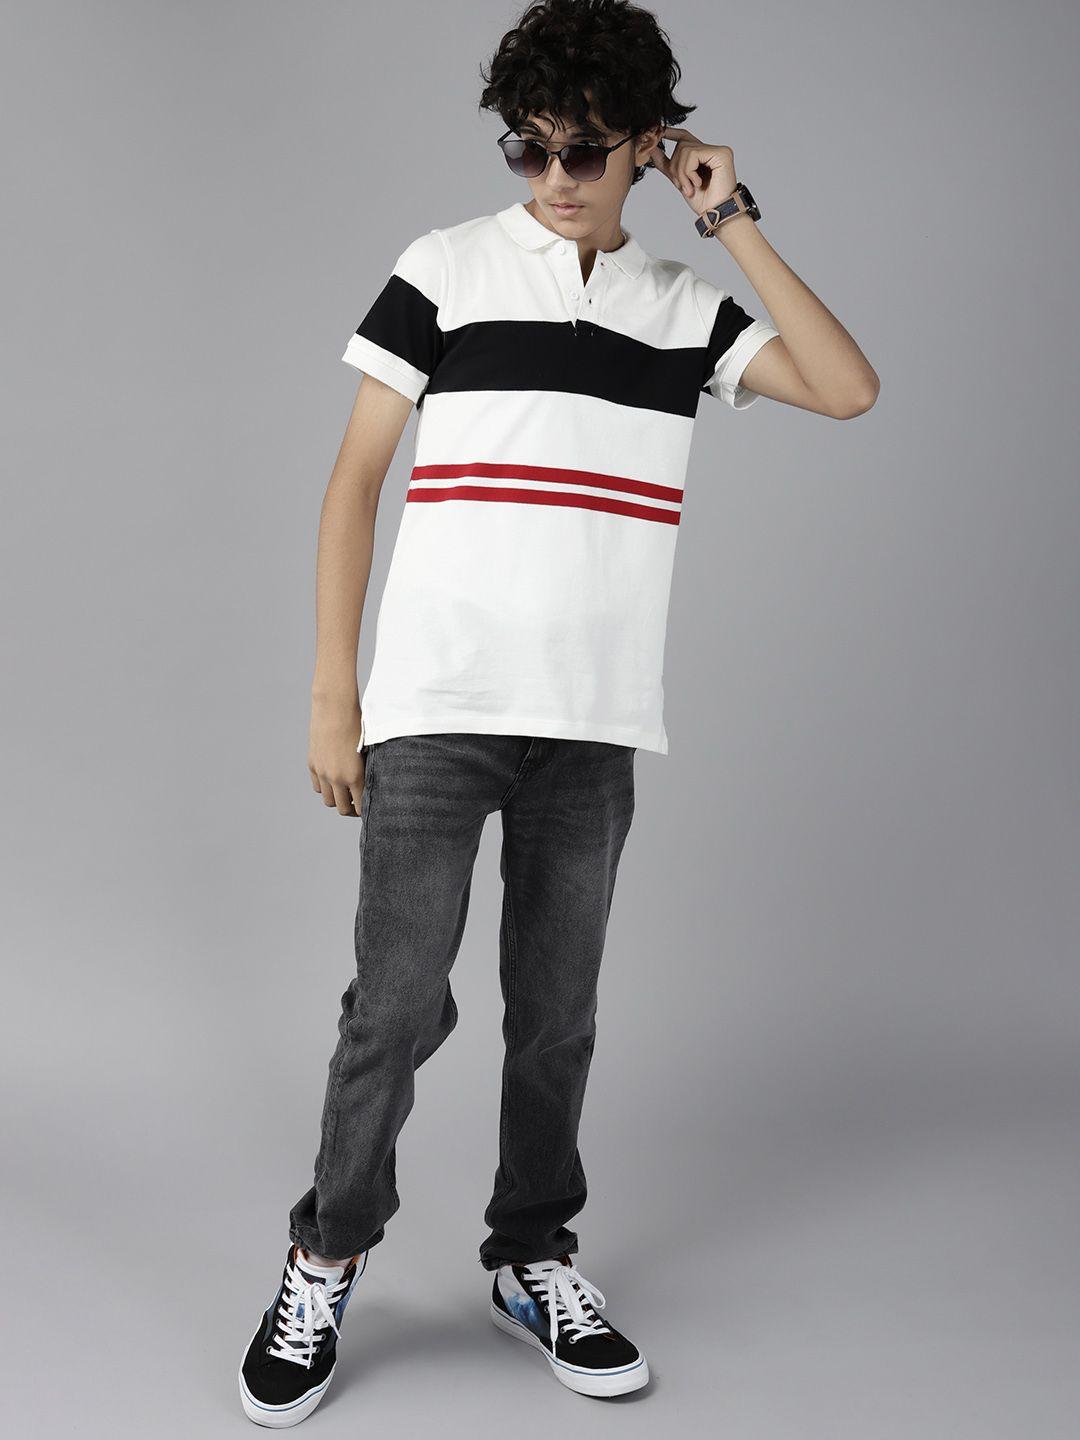 uth by roadster boys off white & black striped polo collar pure cotton t-shirt